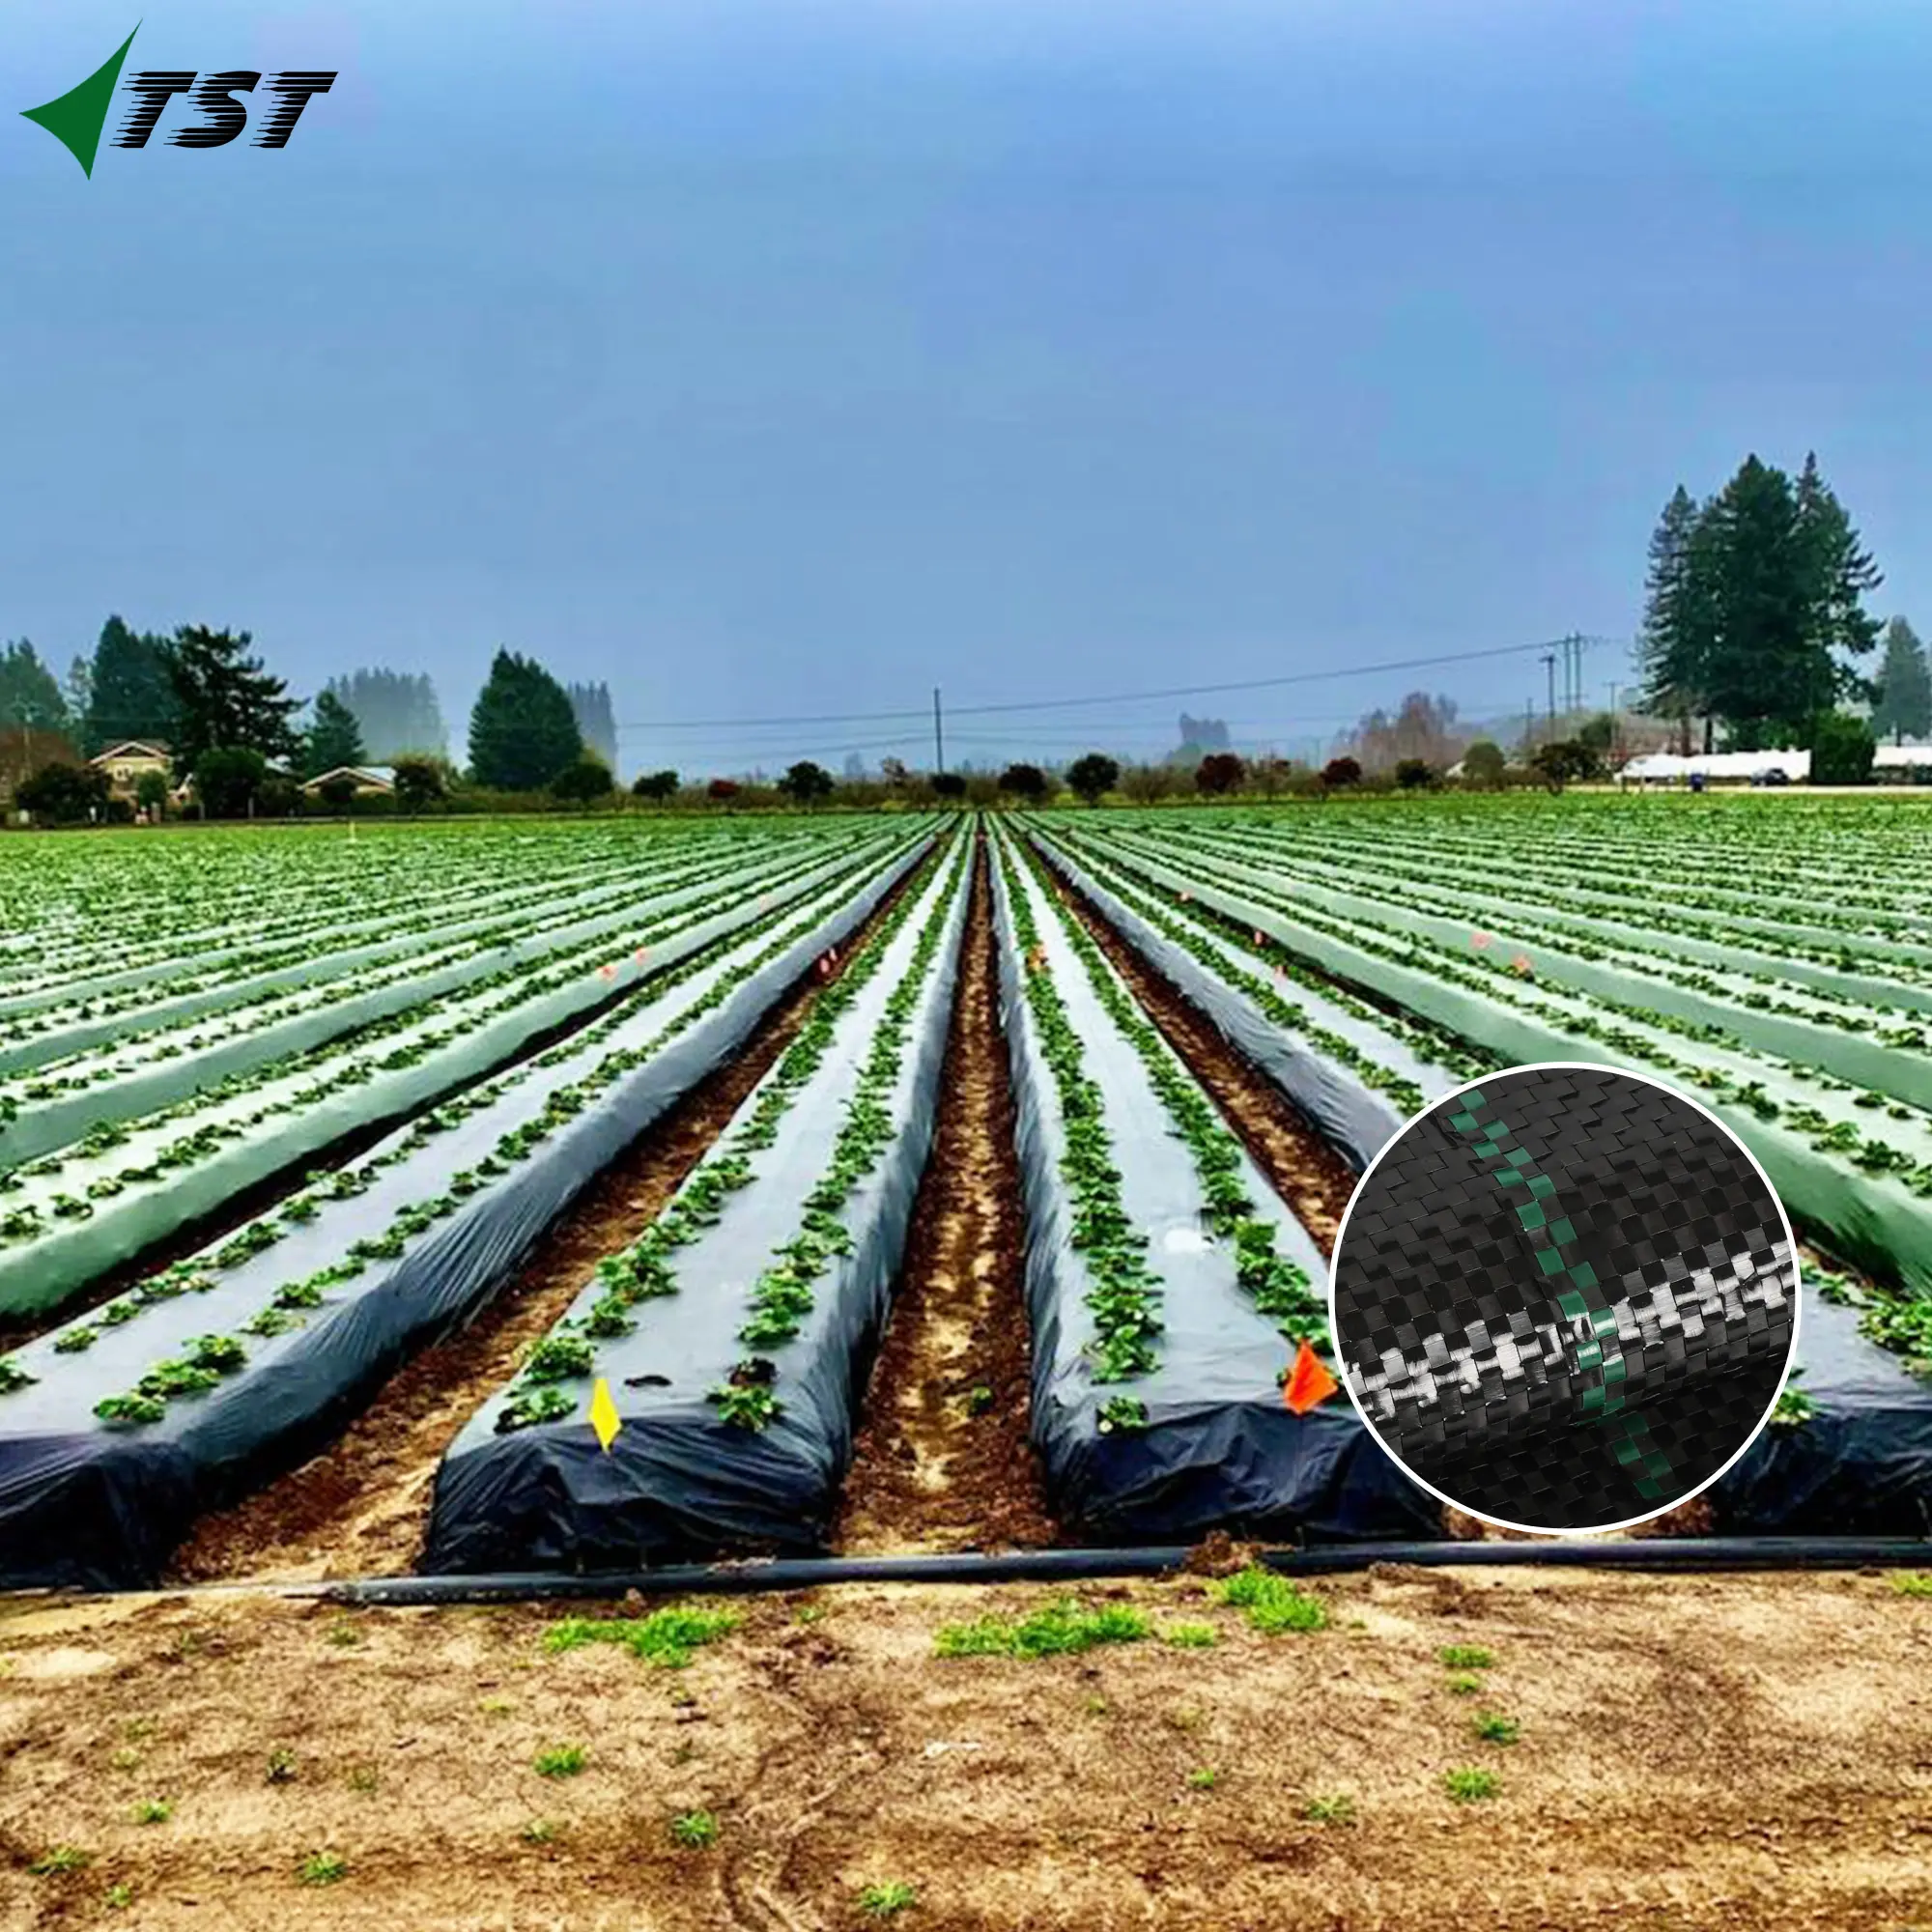 woven weeds mats with high quality and custom colors mats for controlling weeds with nice effect for American agriculture